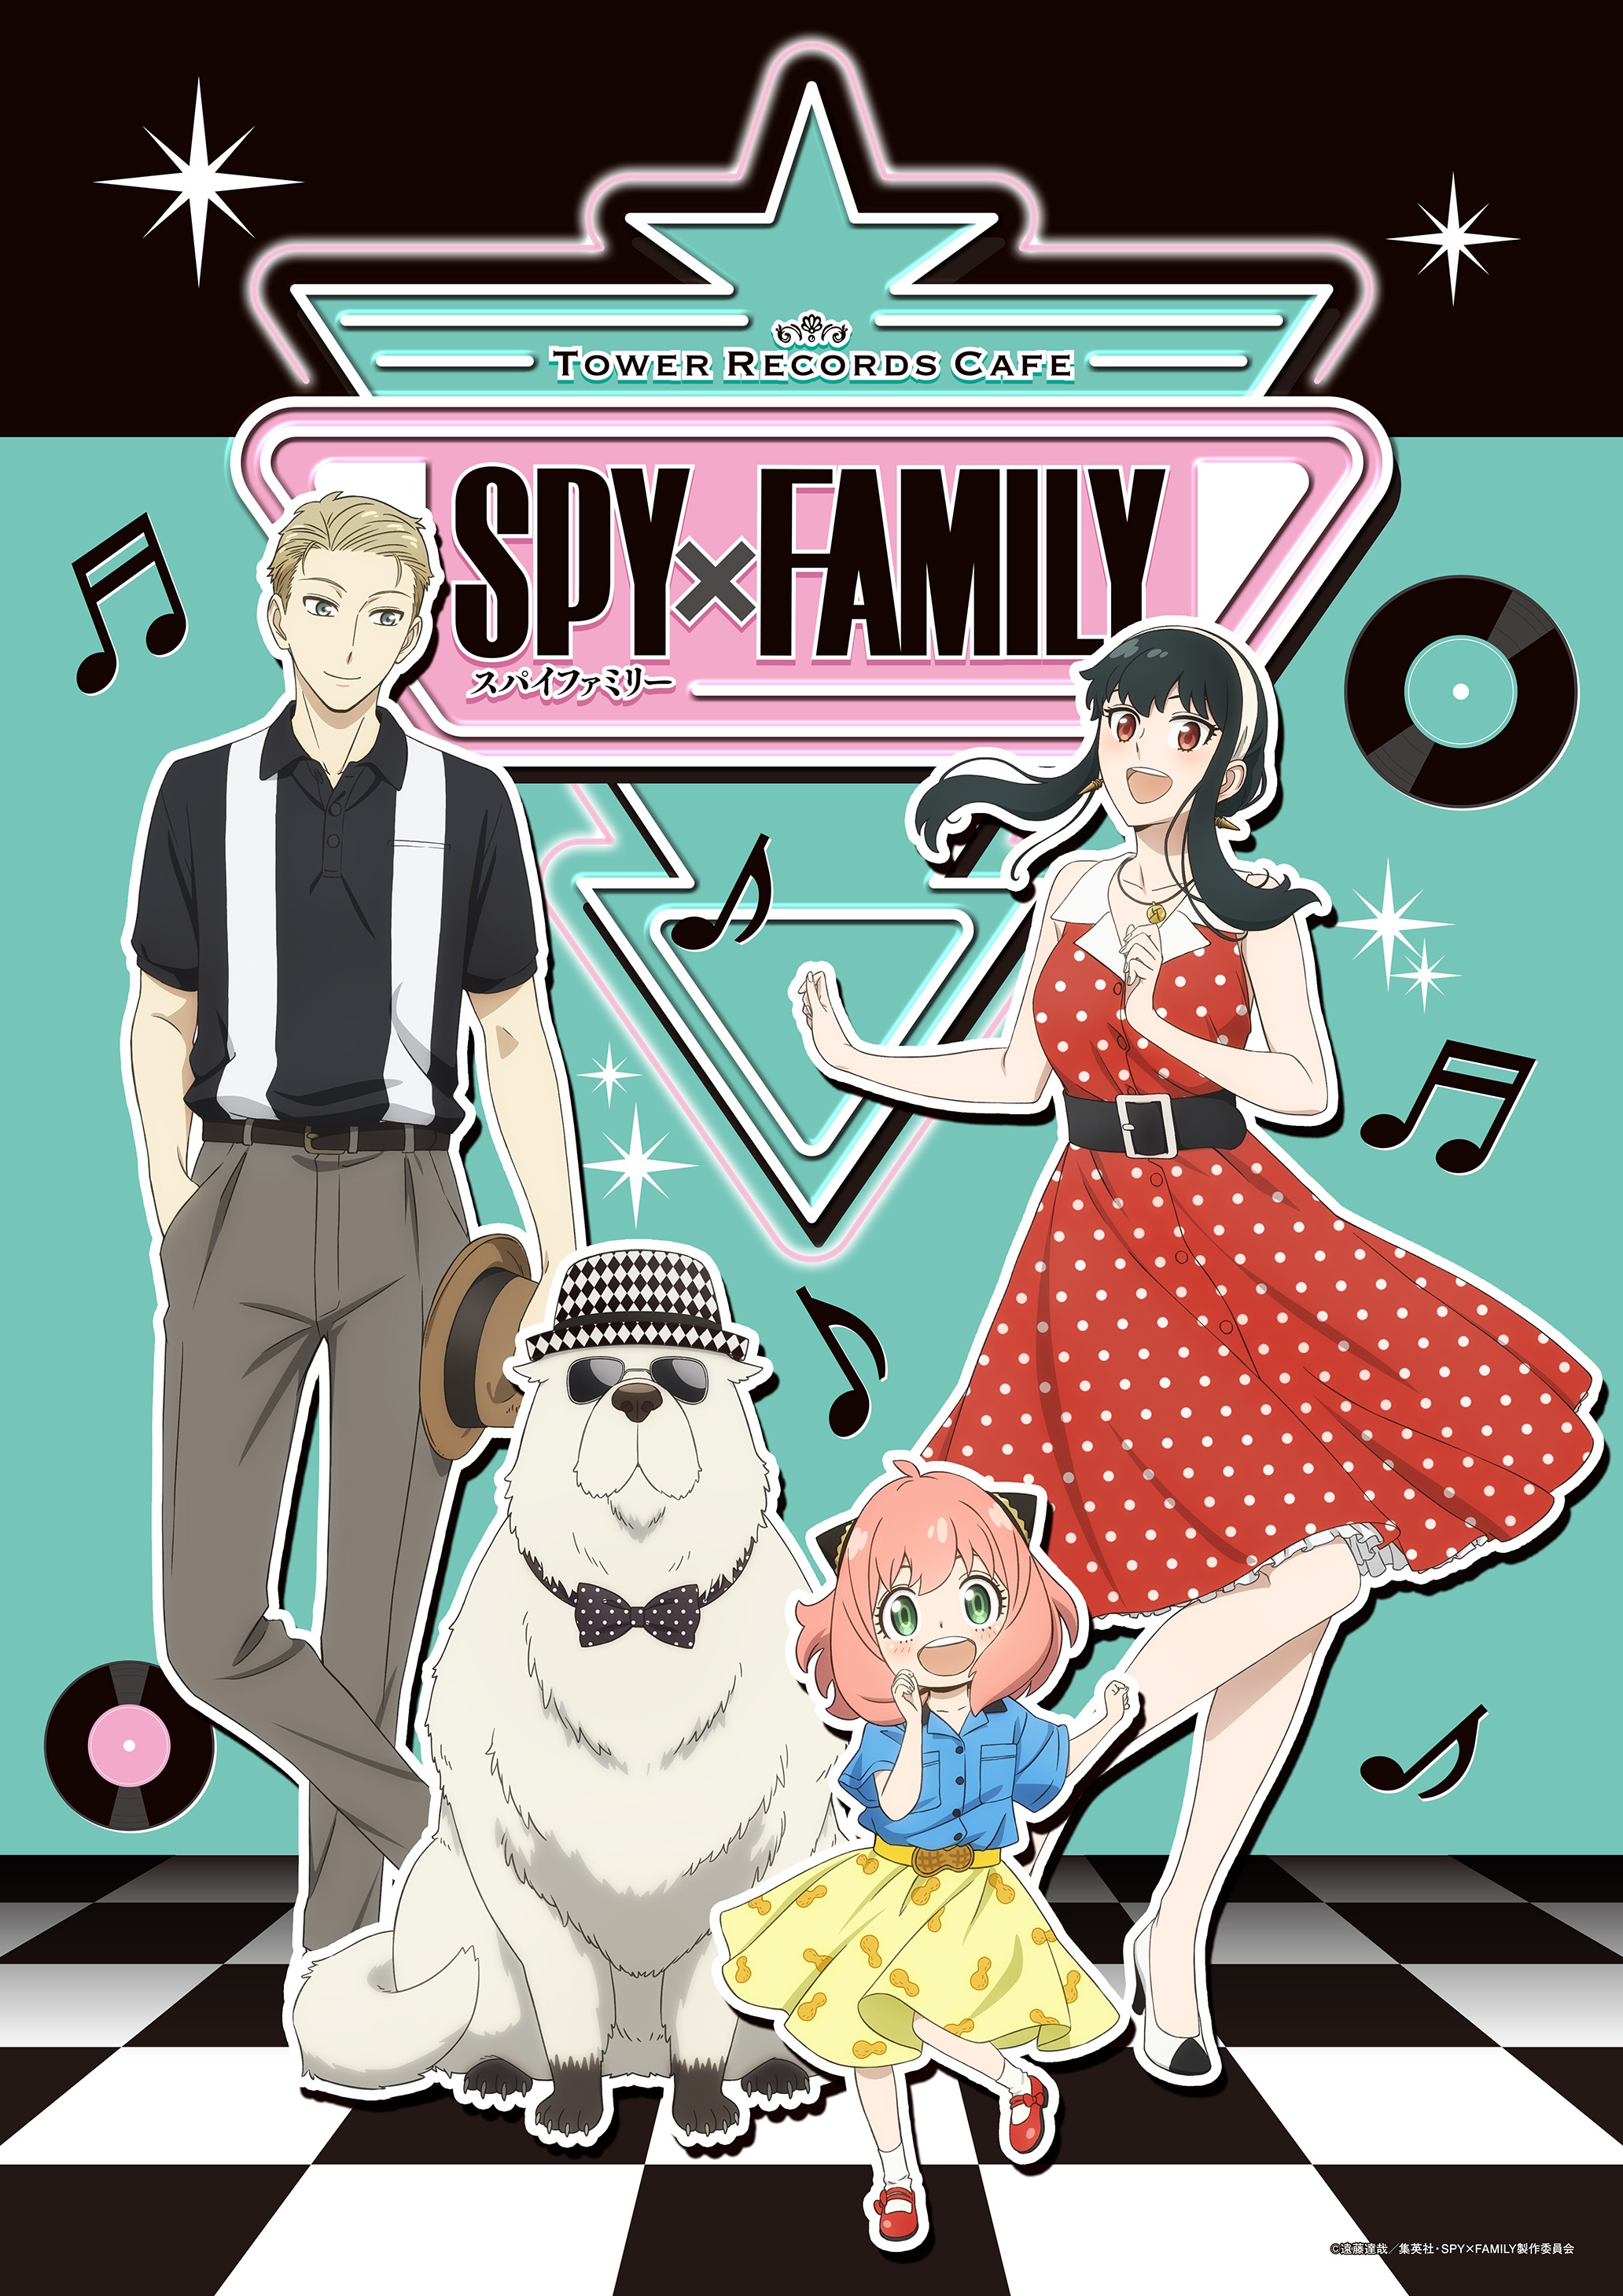 SPY x FAMILY Tower Records cafe